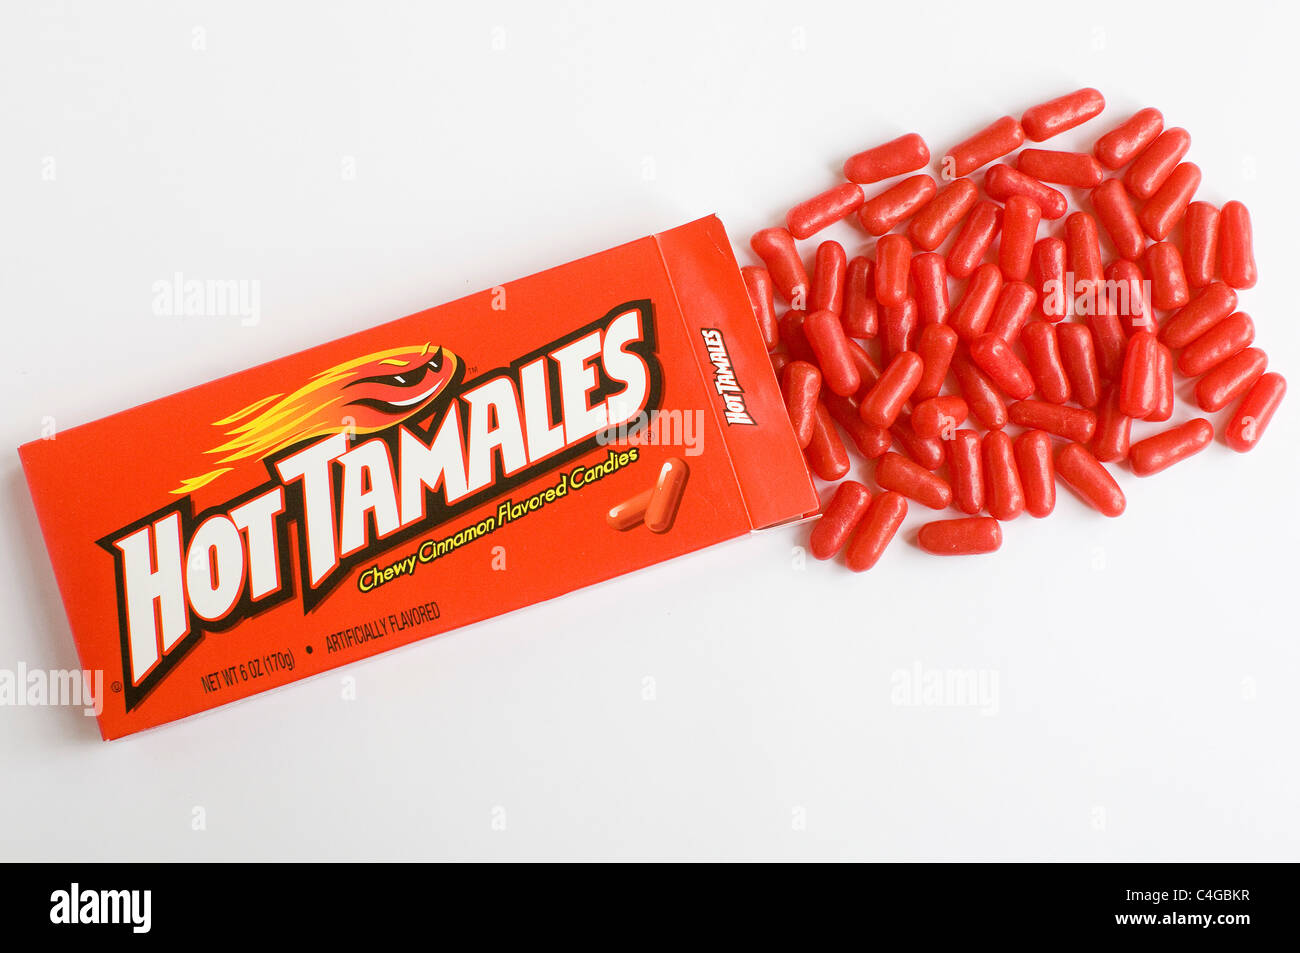 Hot Tamales candy. Stock Photo